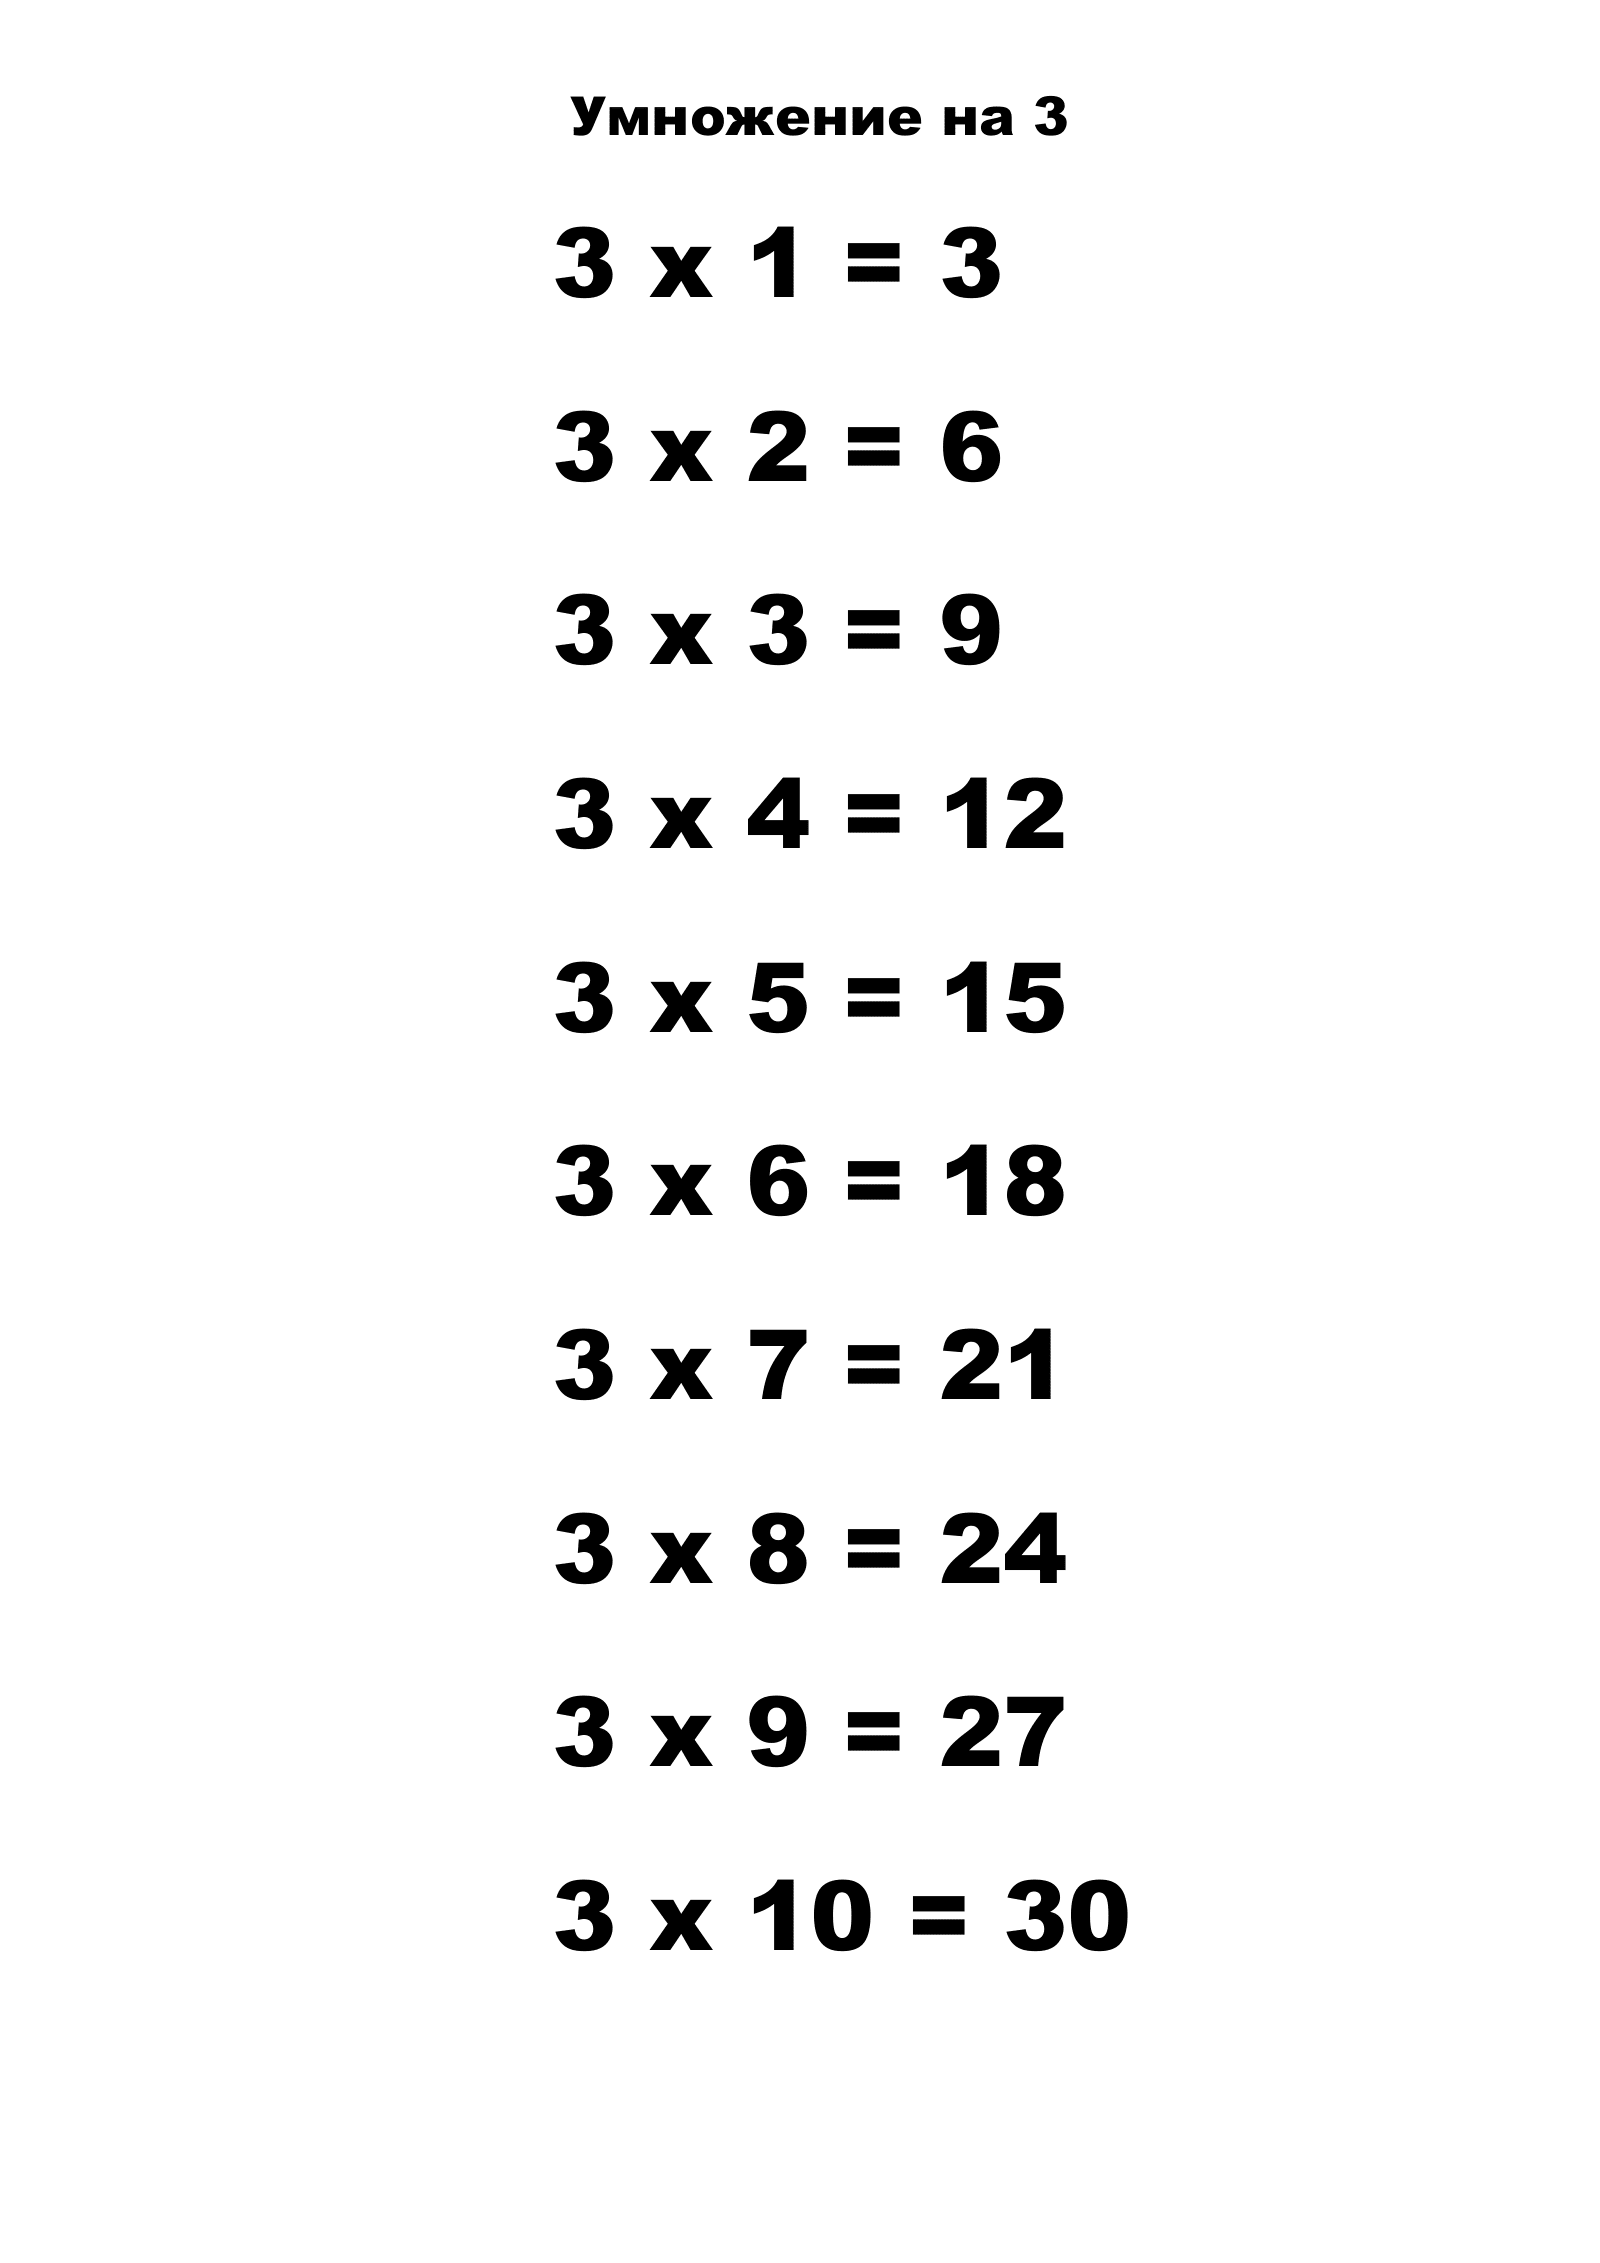 Multiplication Table for 3.